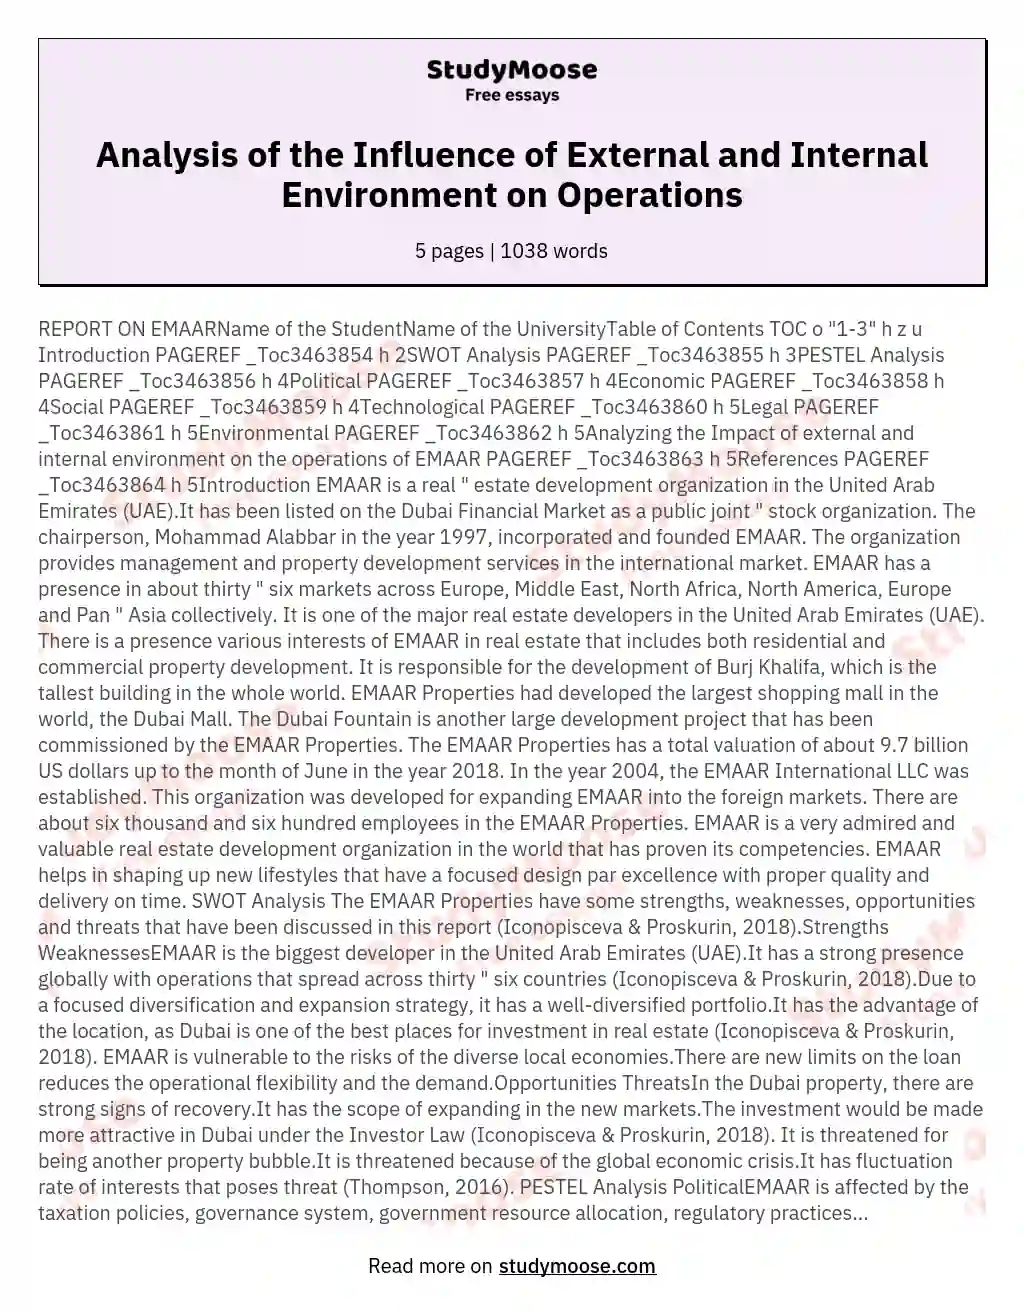 Analysis of the Influence of External and Internal Environment on Operations